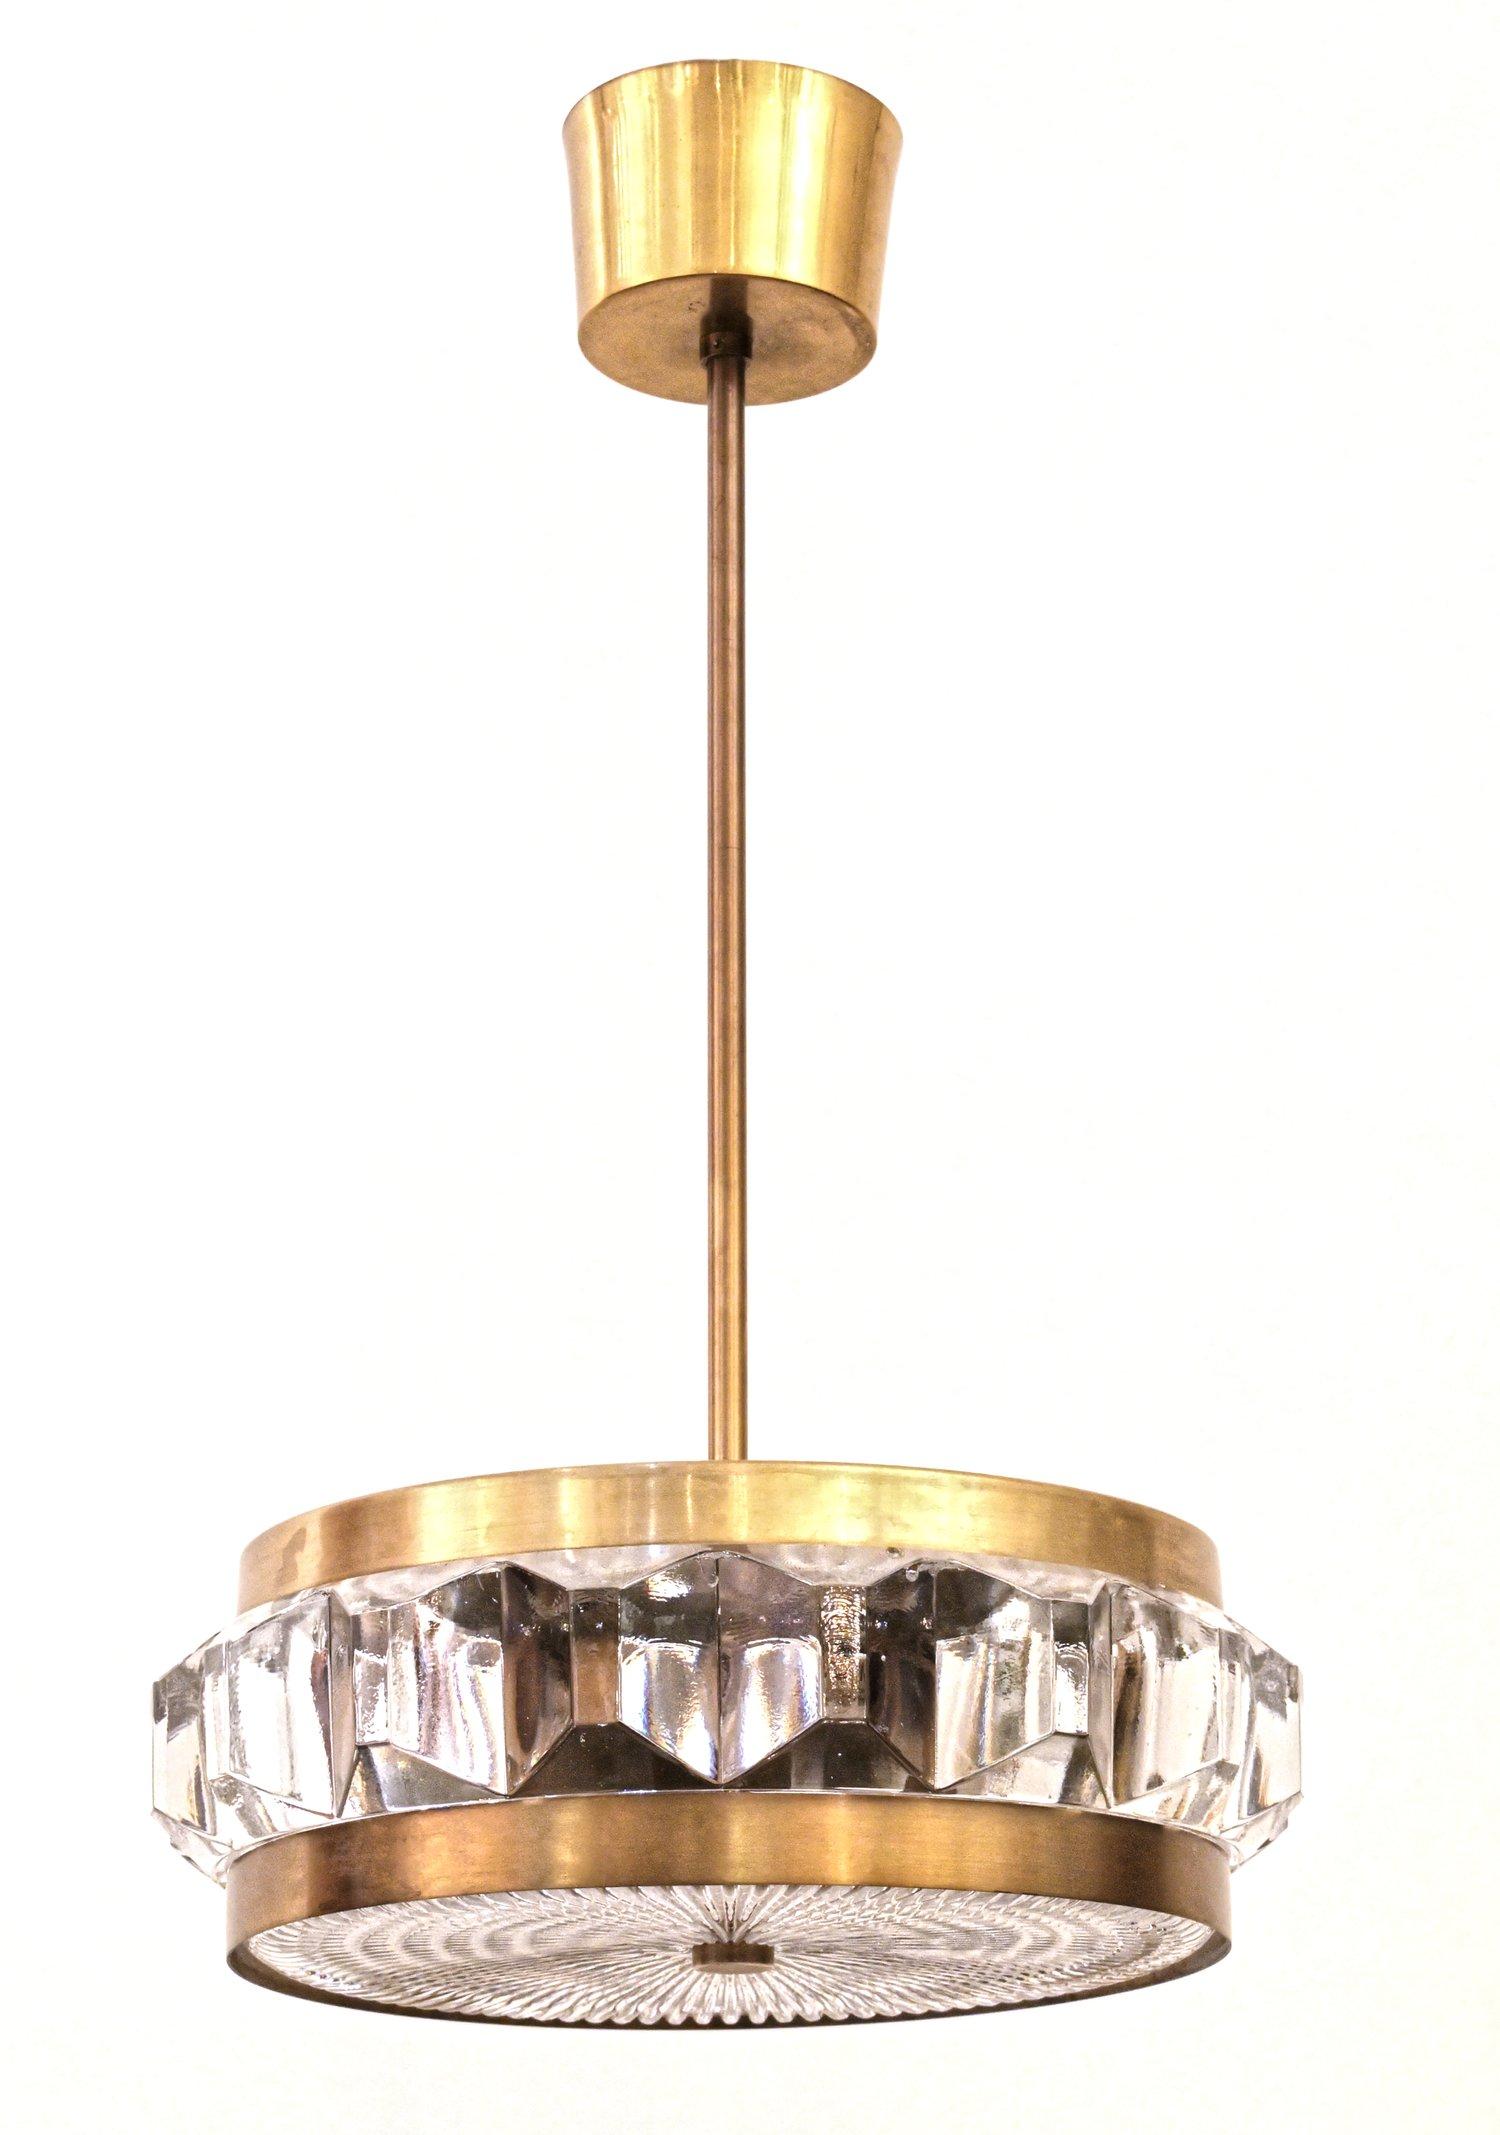 1960s Orrefors Pendant Light In Good Condition For Sale In New York, NY